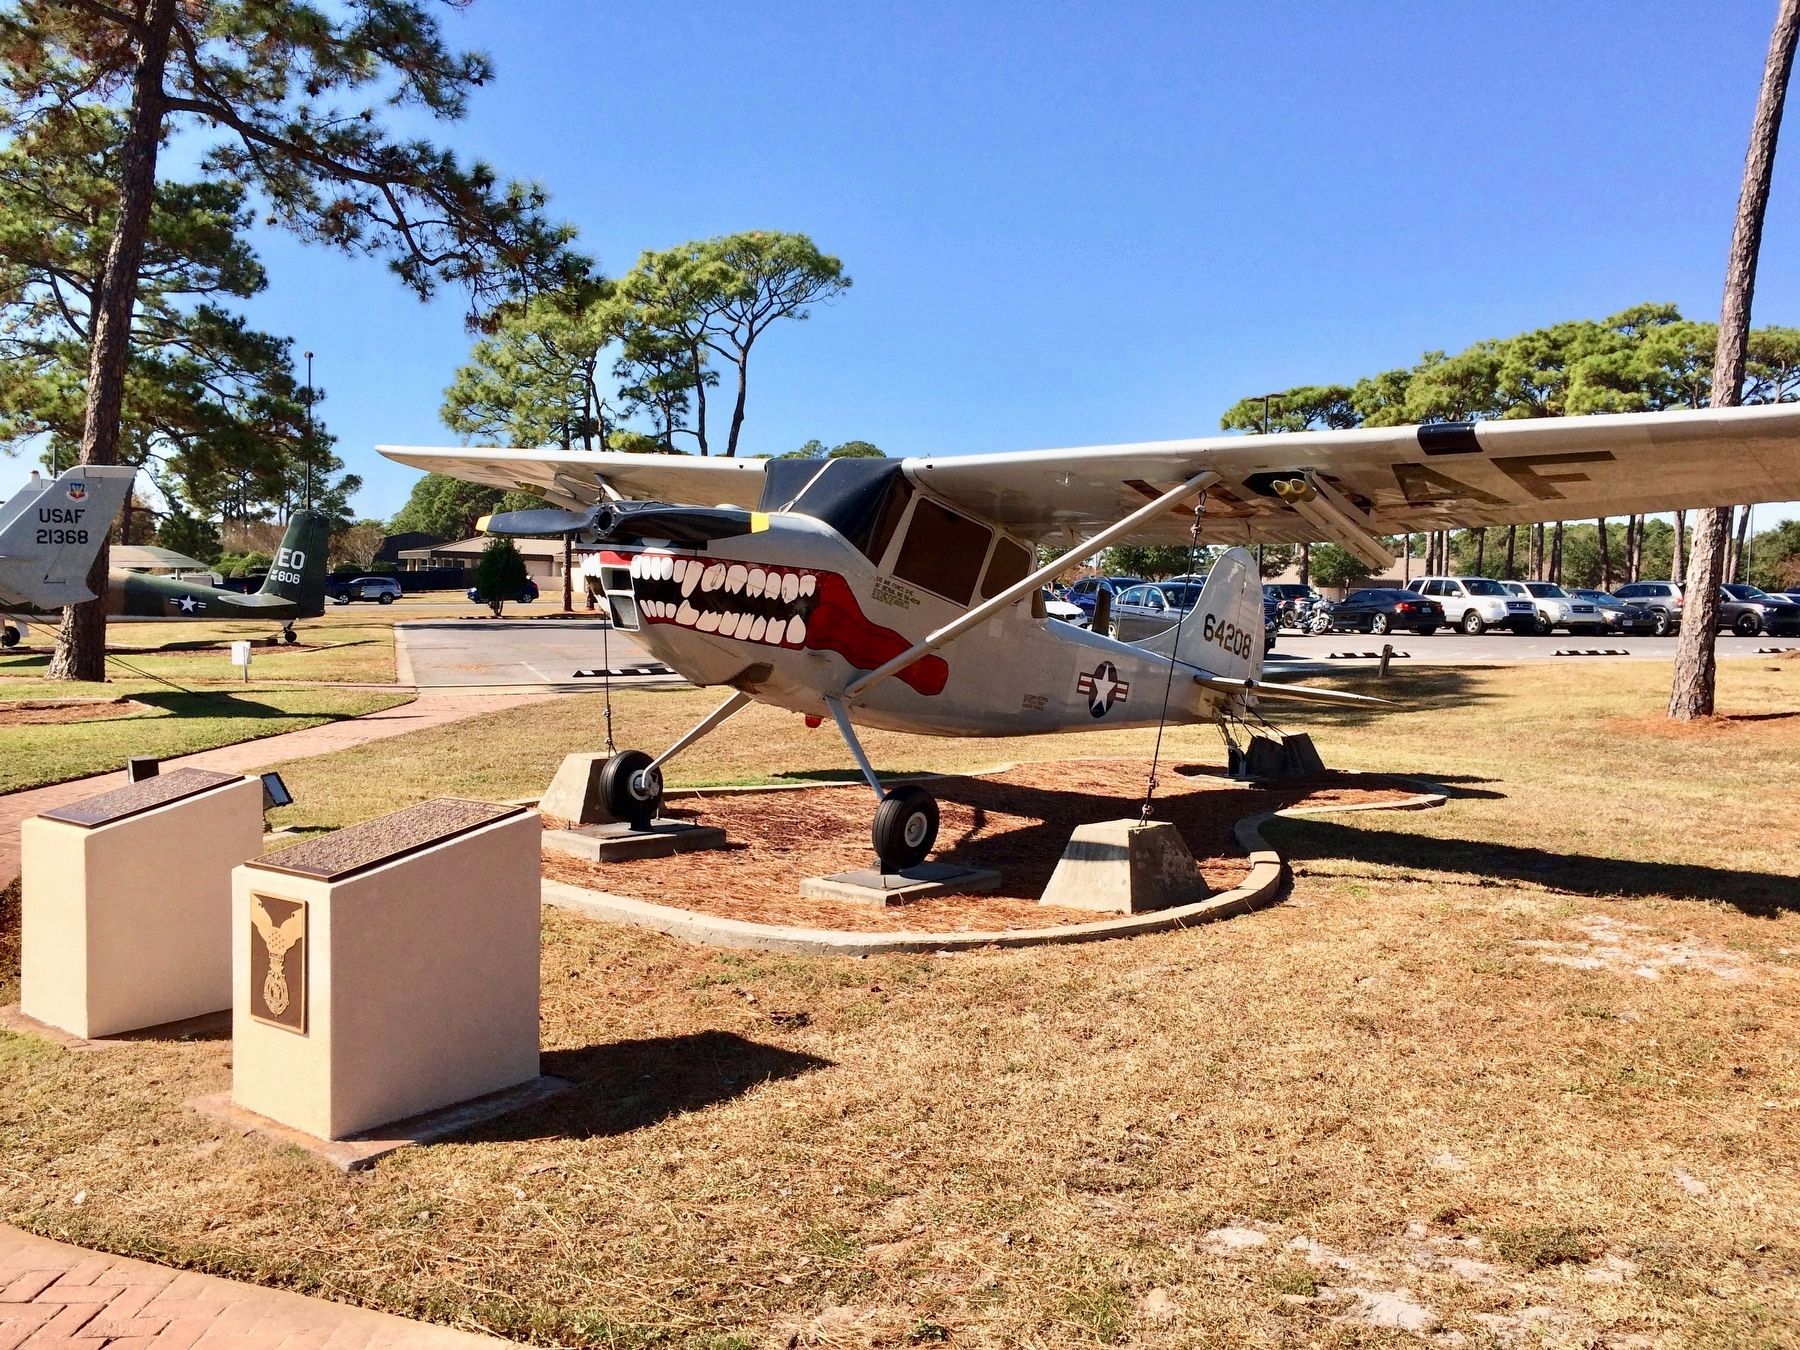 Captain Hilliard A. Willbanks Marker and the O-1E Bird Dog aircraft. image. Click for full size.